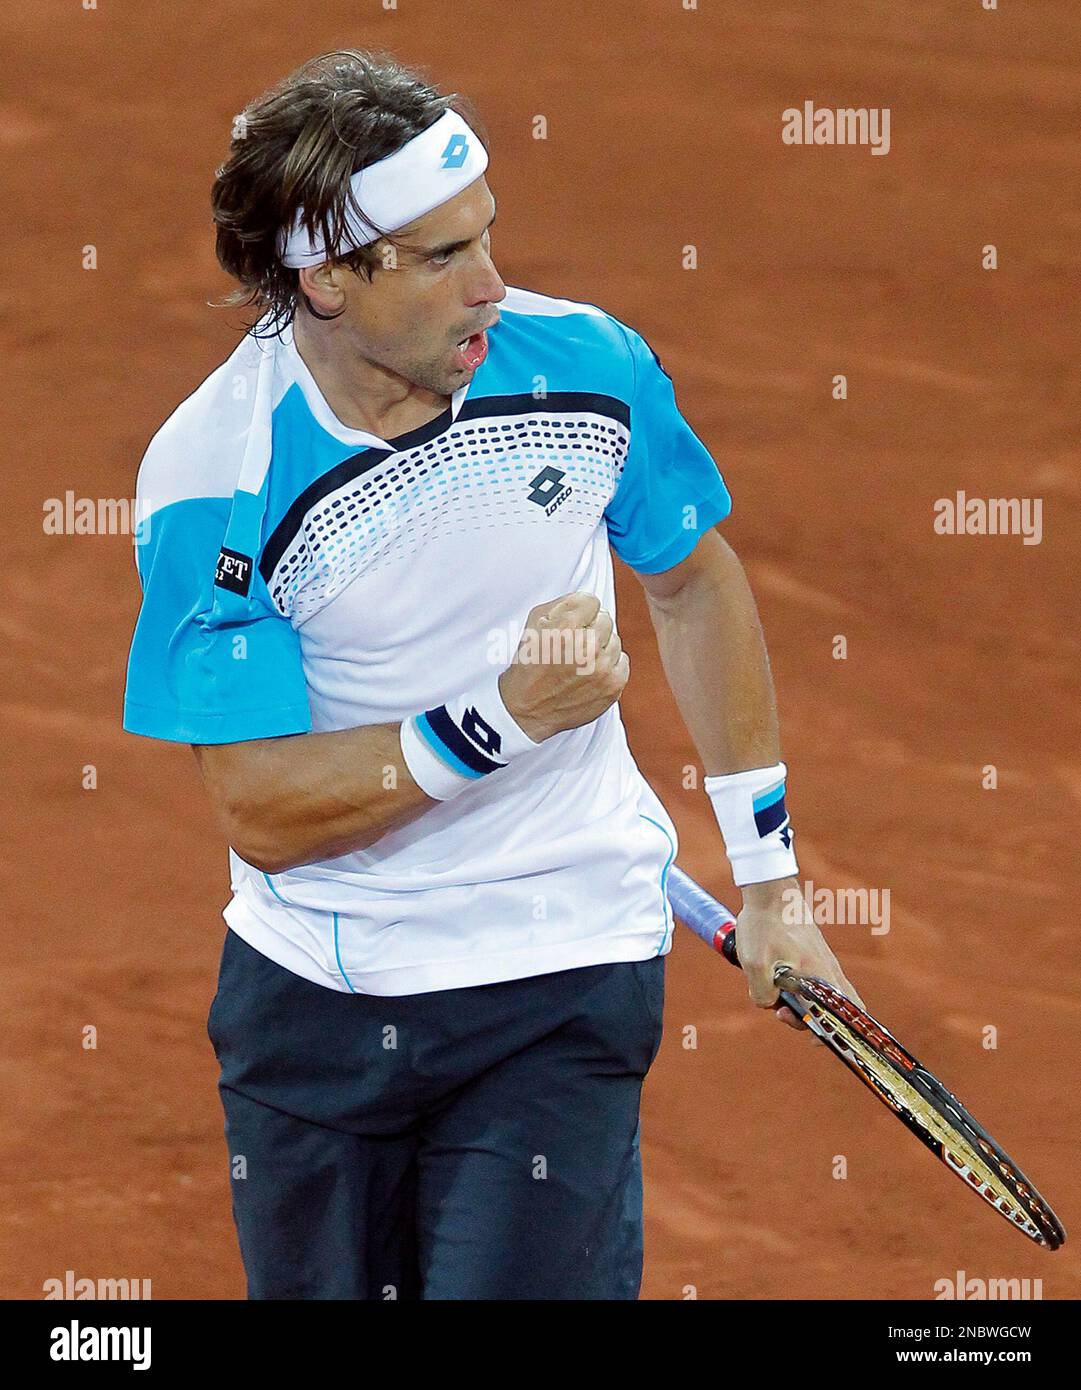 David Ferrer from Spain celebrates during the match against Novak Djokovic  from Serbia in the Madrid Open tennis tournament in Madrid, Friday, May 6,  2011.(AP Photo/Andres Kudacki Stock Photo - Alamy